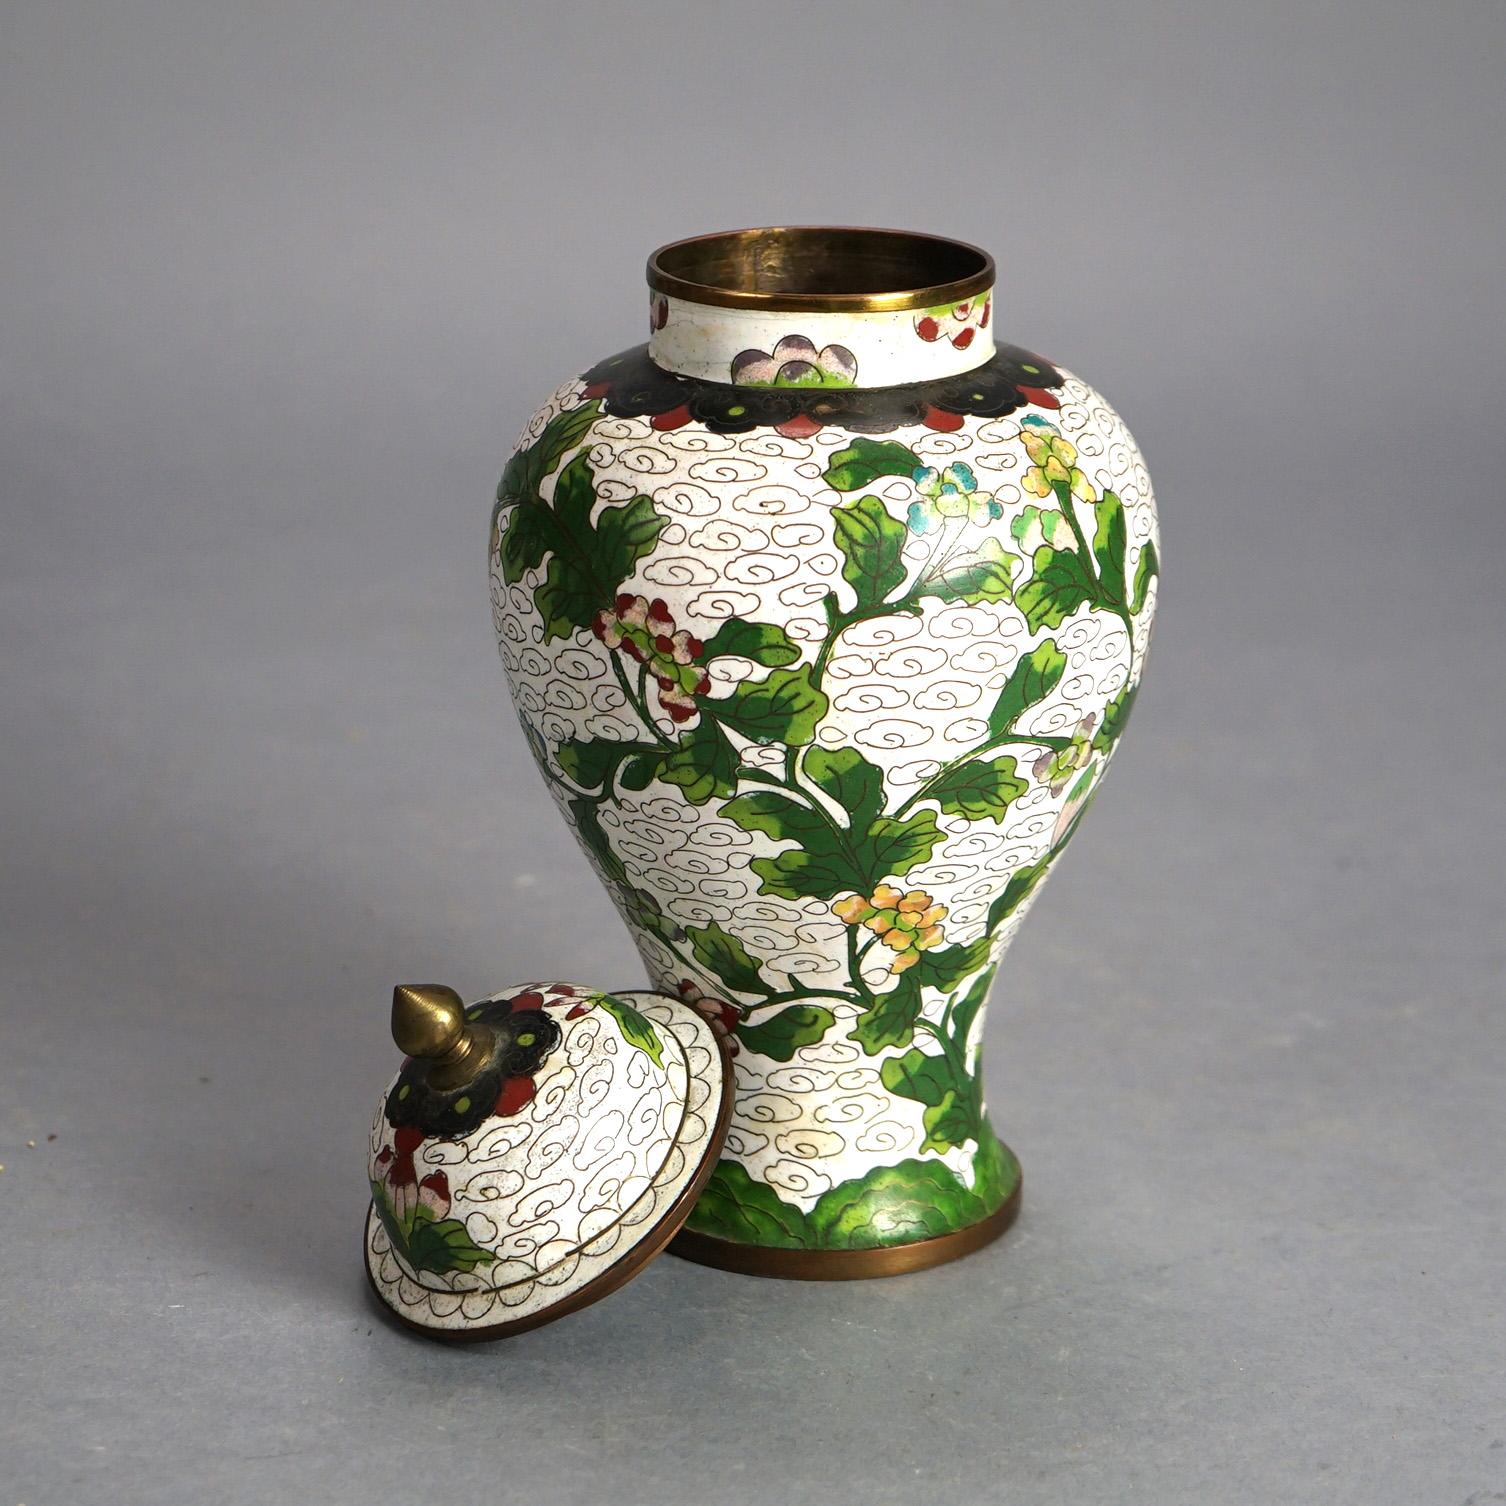 20th Century Antique Chinese Bronze Cloisonne Enameled Lidded Urn with Flowers C1920 For Sale